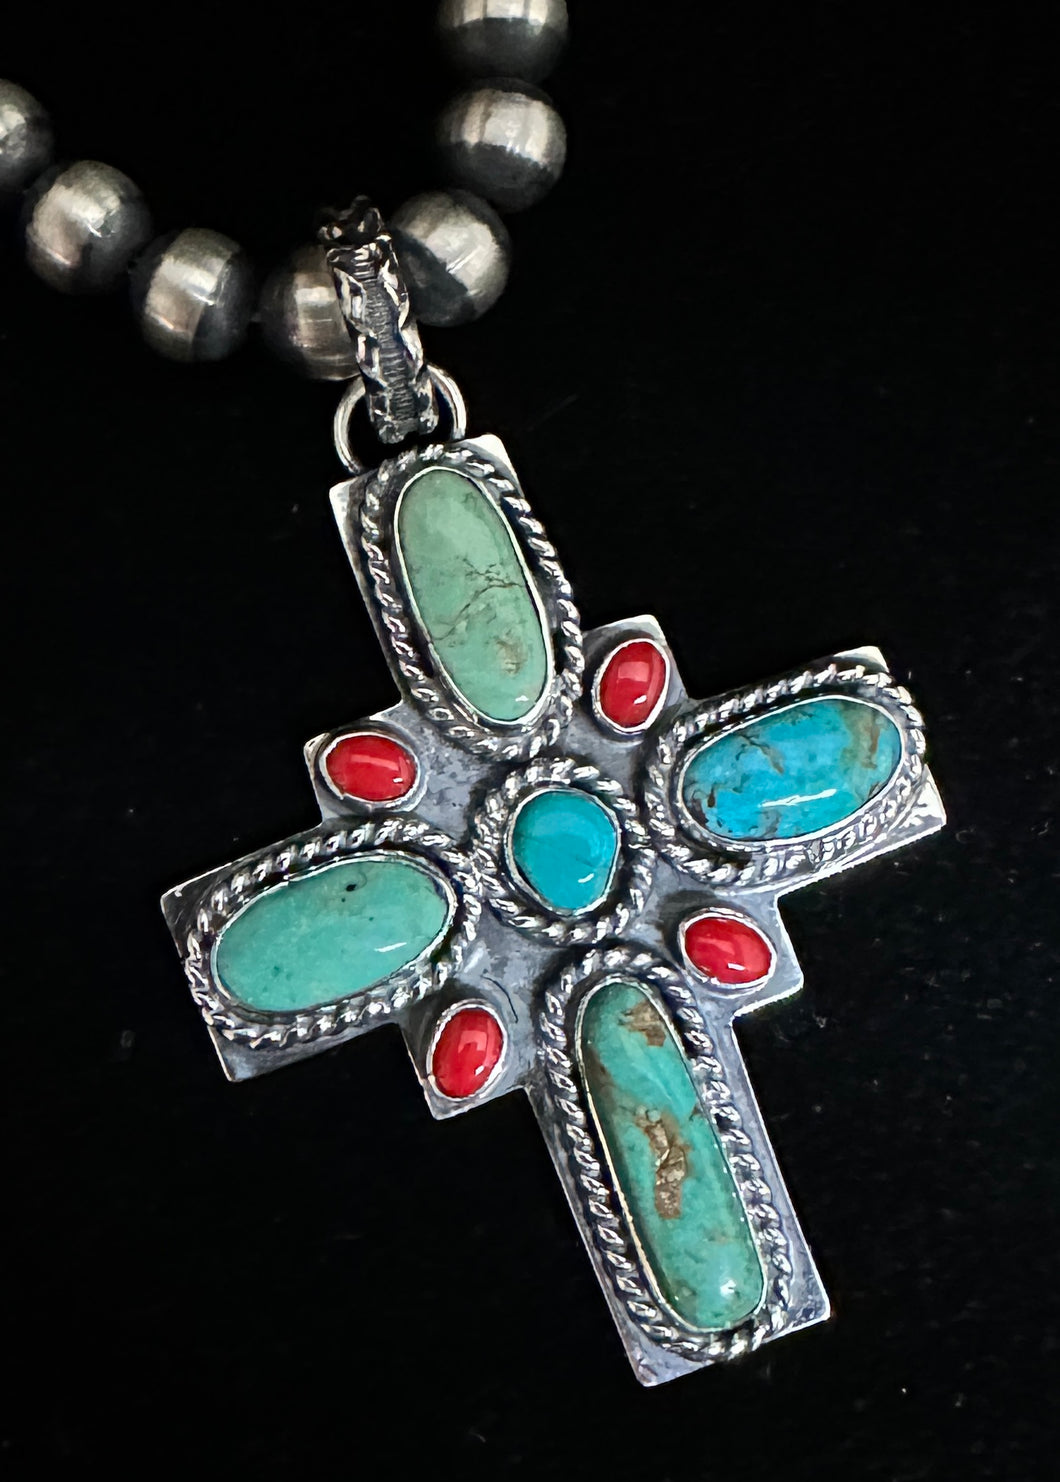 Turquoise and Red Coral Sterling Silver Cross Necklace Pendant